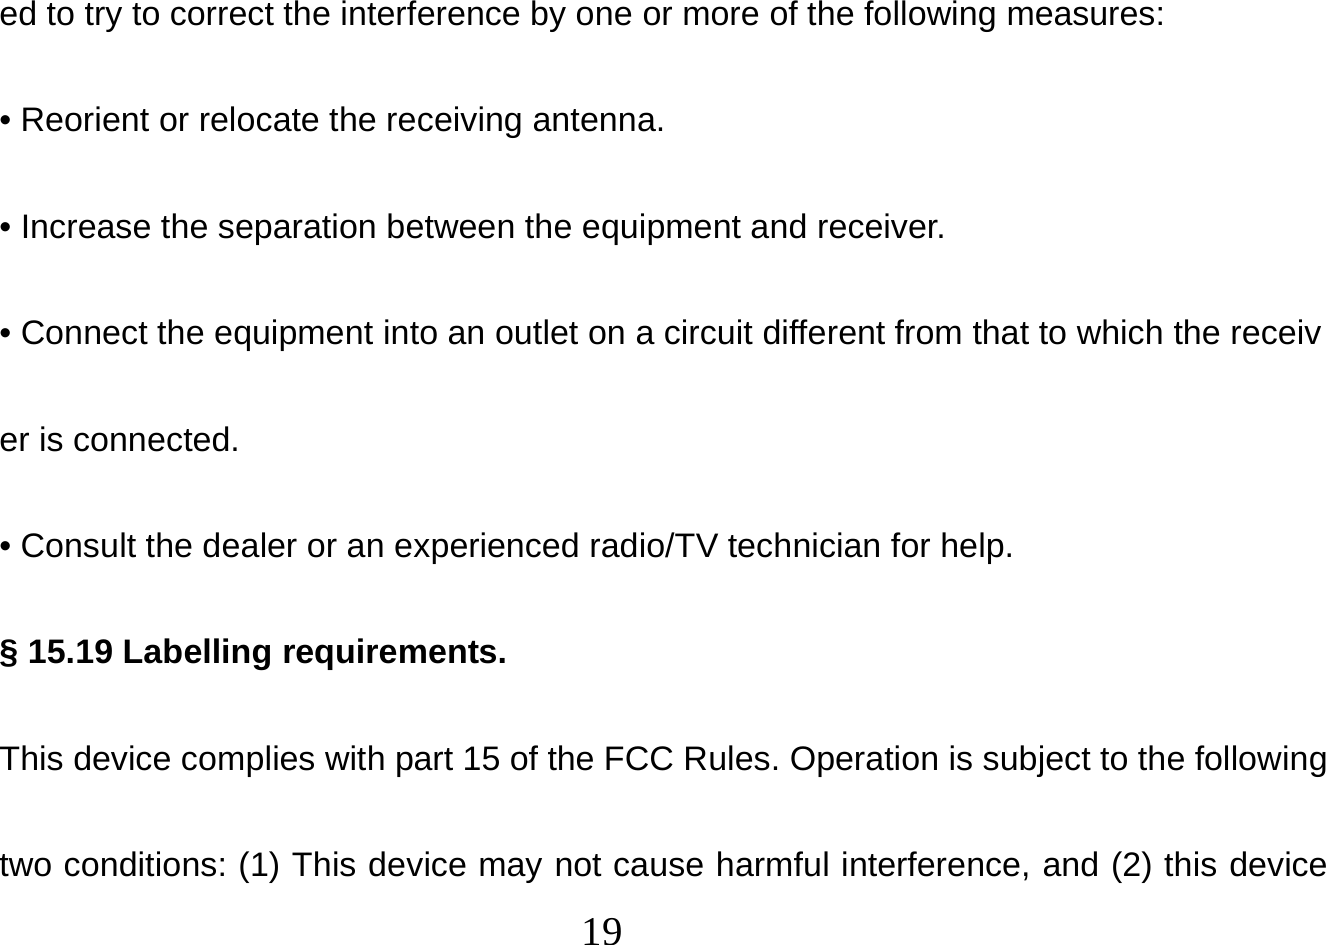  19  ed to try to correct the interference by one or more of the following measures: • Reorient or relocate the receiving antenna. • Increase the separation between the equipment and receiver. • Connect the equipment into an outlet on a circuit different from that to which the receiver is connected. • Consult the dealer or an experienced radio/TV technician for help. § 15.19 Labelling requirements. This device complies with part 15 of the FCC Rules. Operation is subject to the following two conditions: (1) This device may not cause harmful interference, and (2) this device 